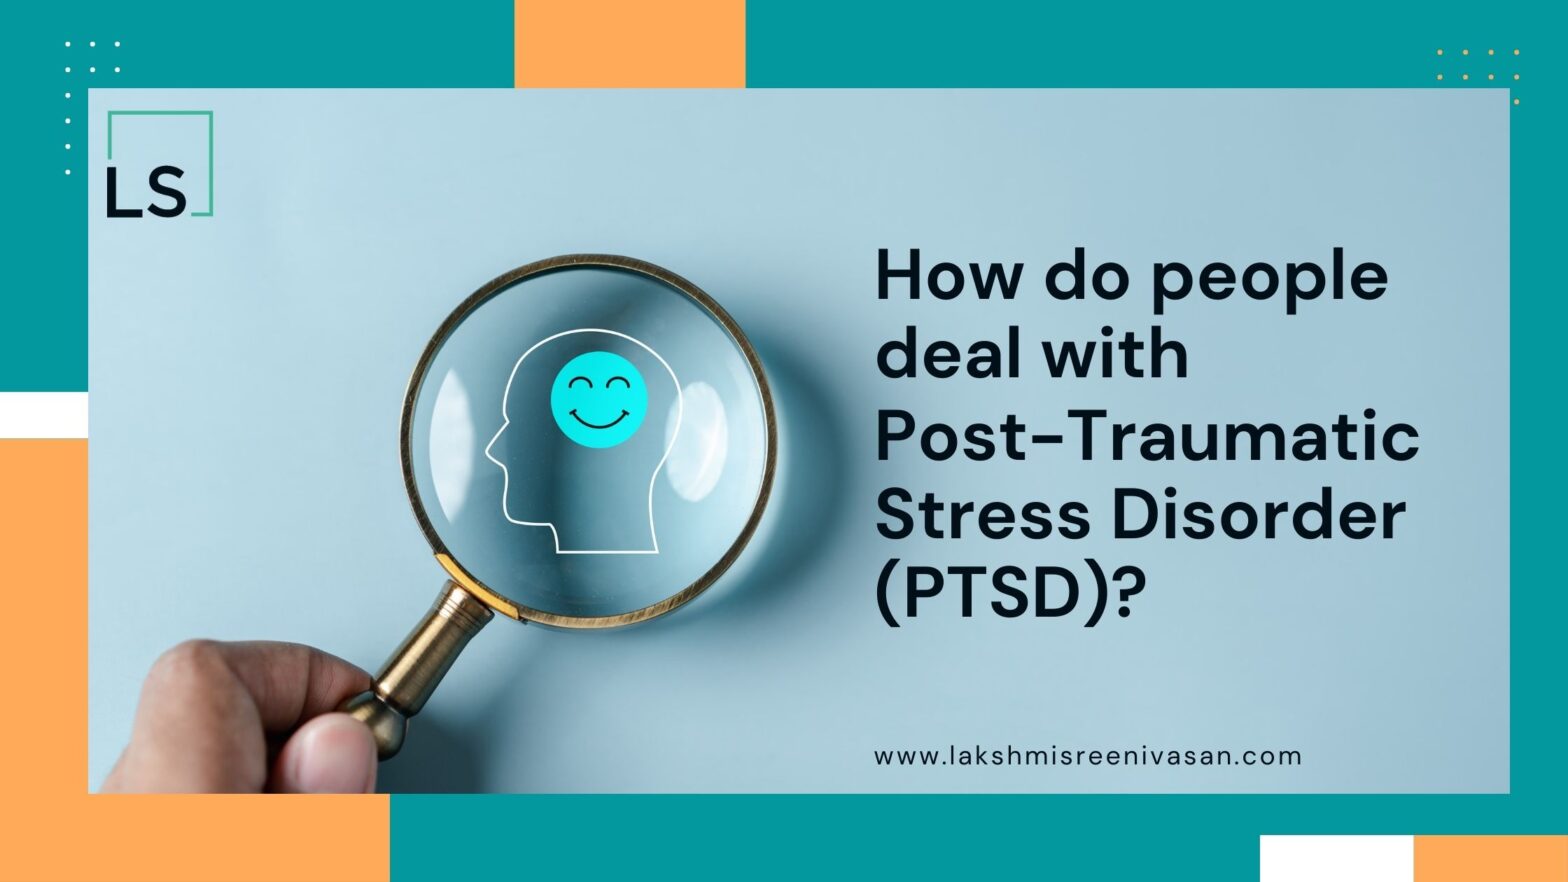 How do people deal with Post-Traumatic Stress Disorder (PTSD)?